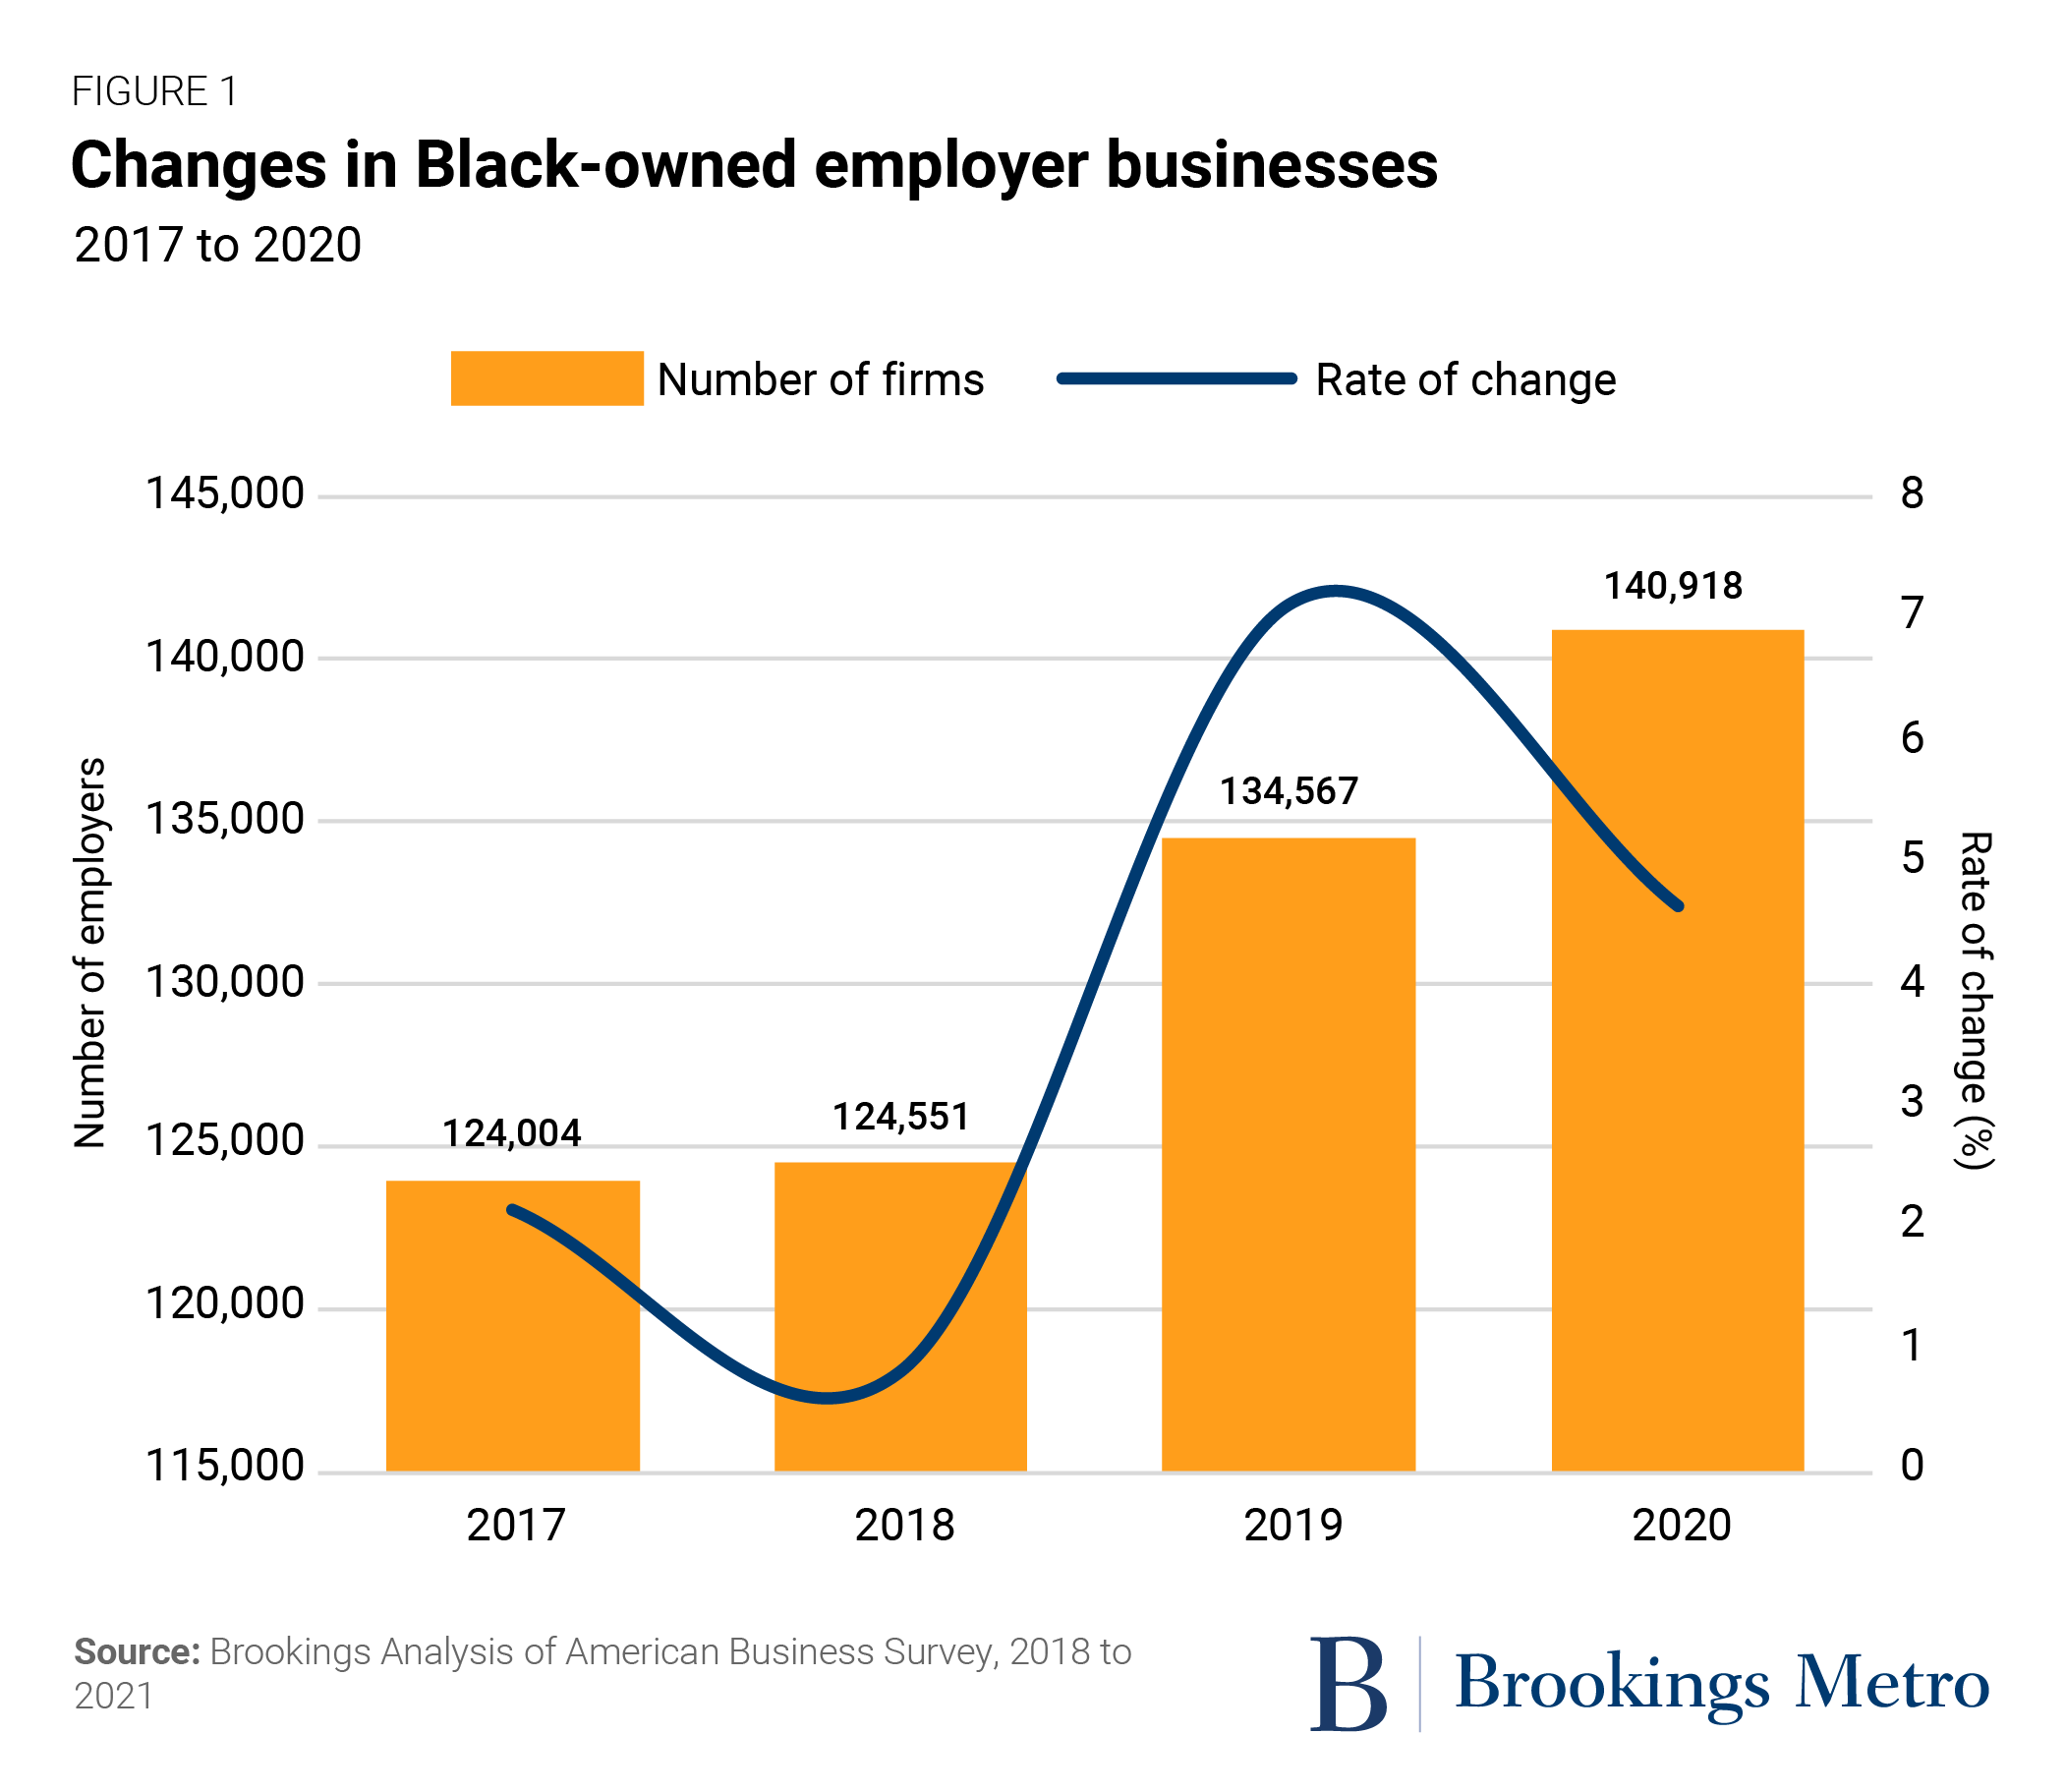 Figure 1: Changes in Black-owned employer businesses, 2017 to 2020